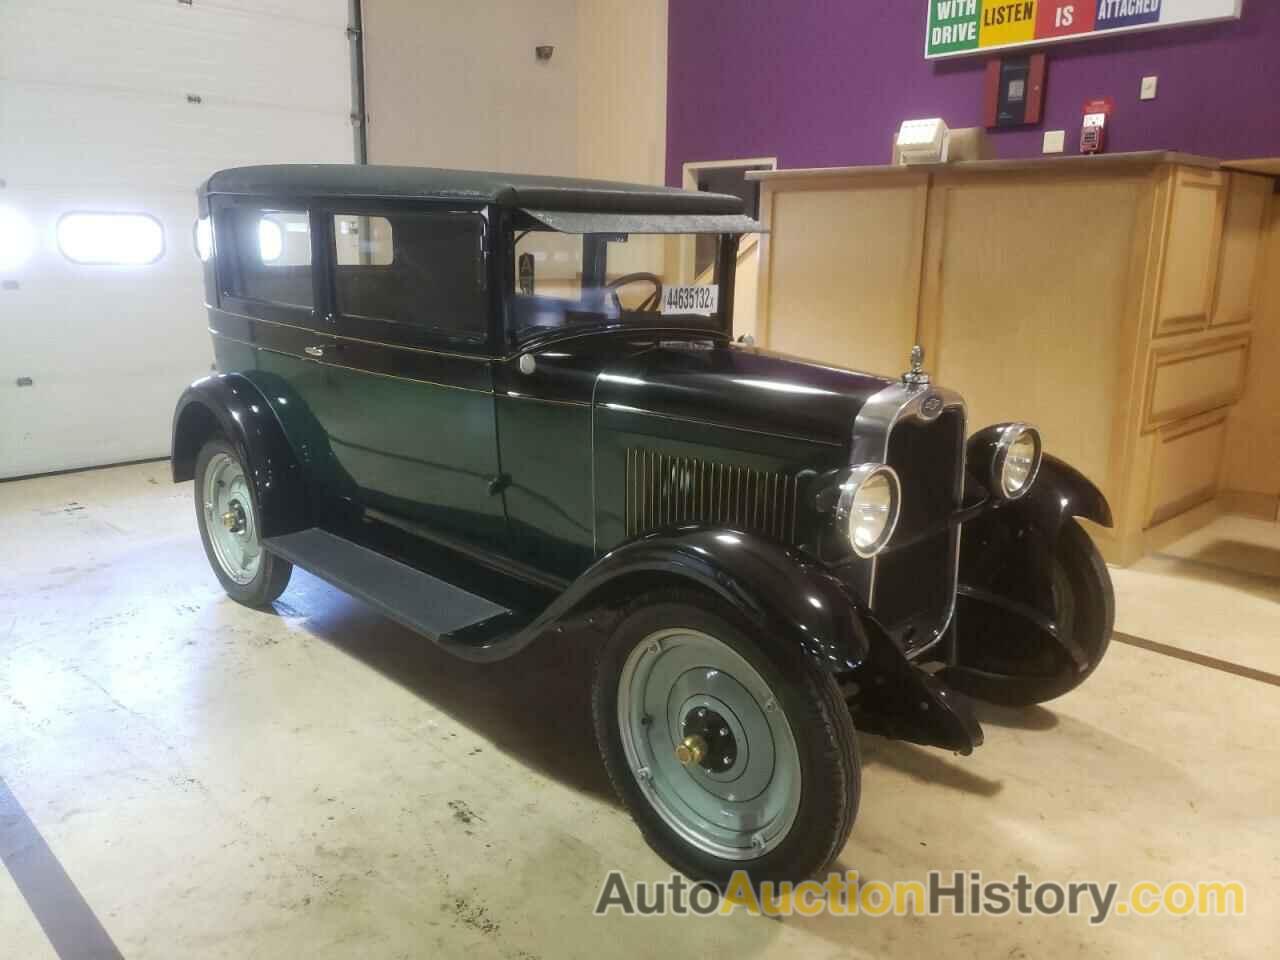 1928 CHEVROLET ALL OTHER, B31095